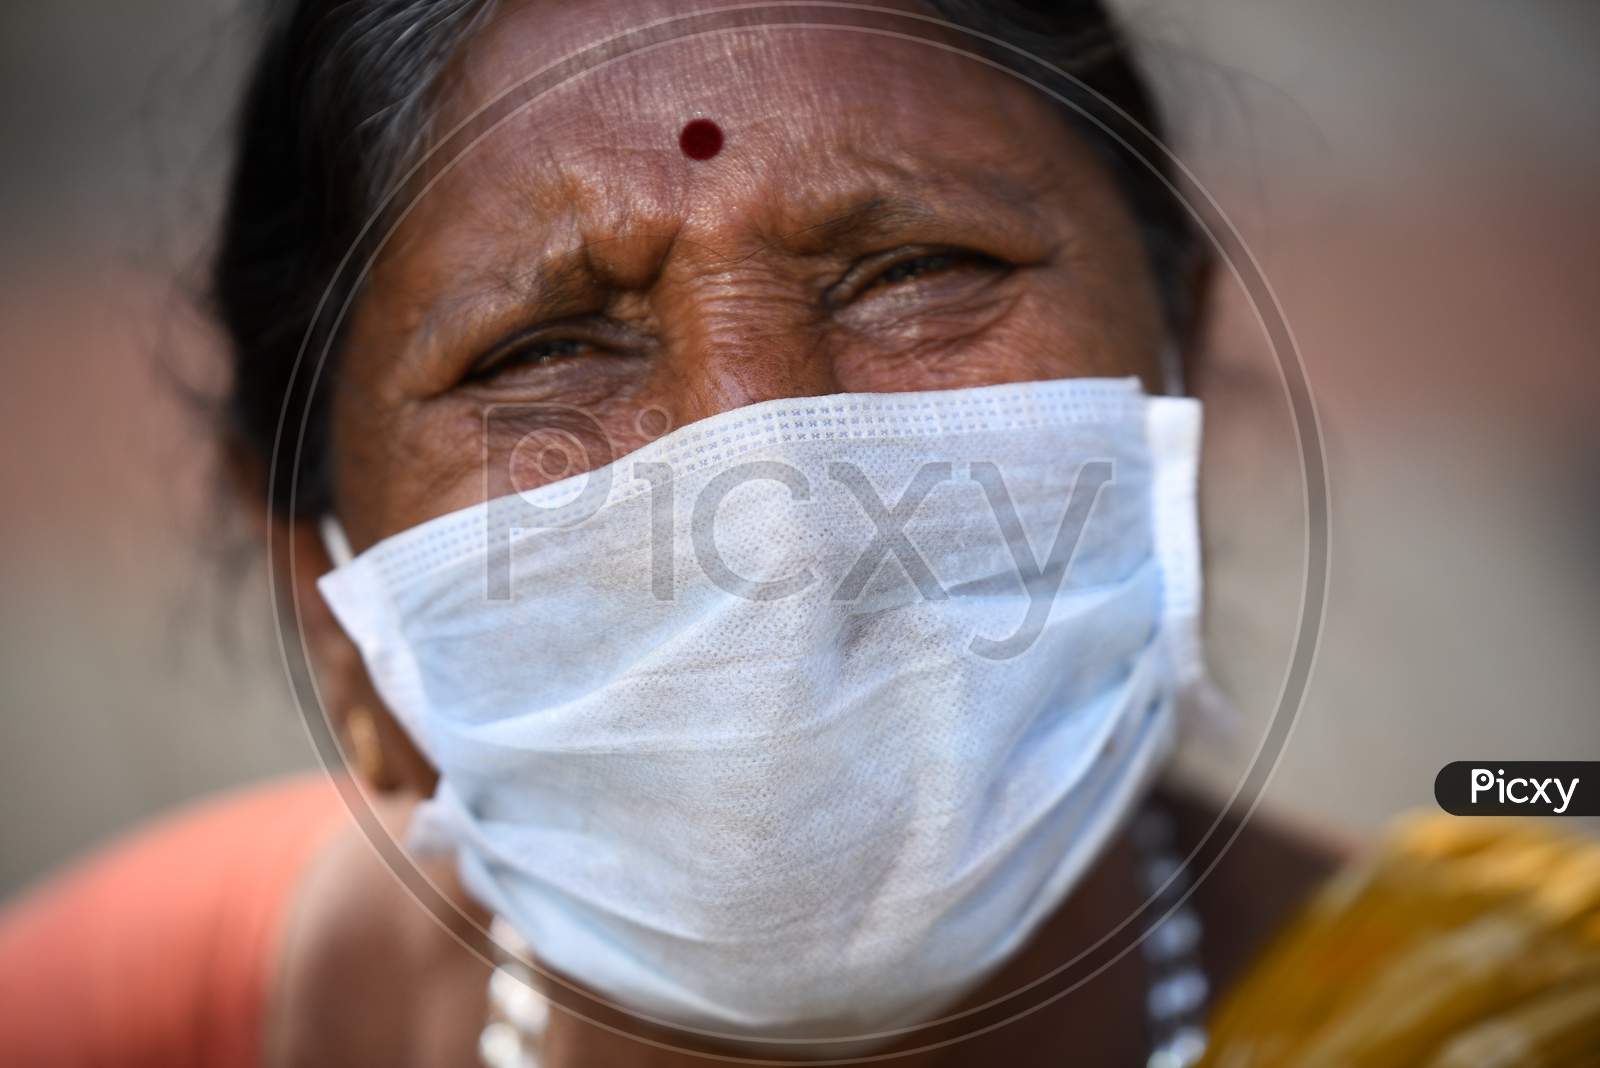 Roadside Woman vendor Wearing Mask Safety From Corona Virus or COVID 19 Virus Spread